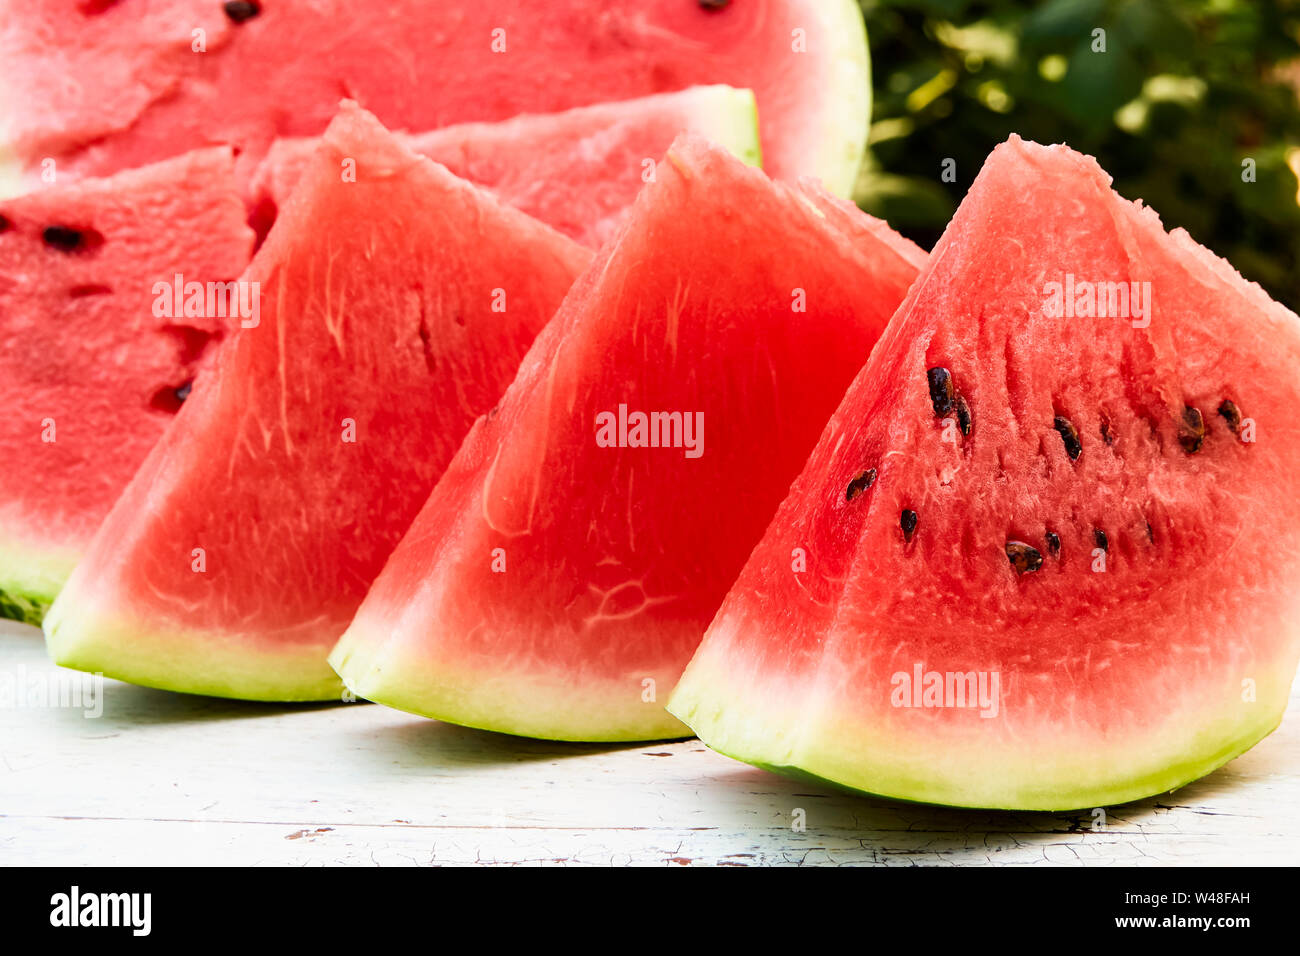 Fresh ripe striped sliced watermelon on a wooden old table, against the background of green leaves, outdoors. Stock Photo